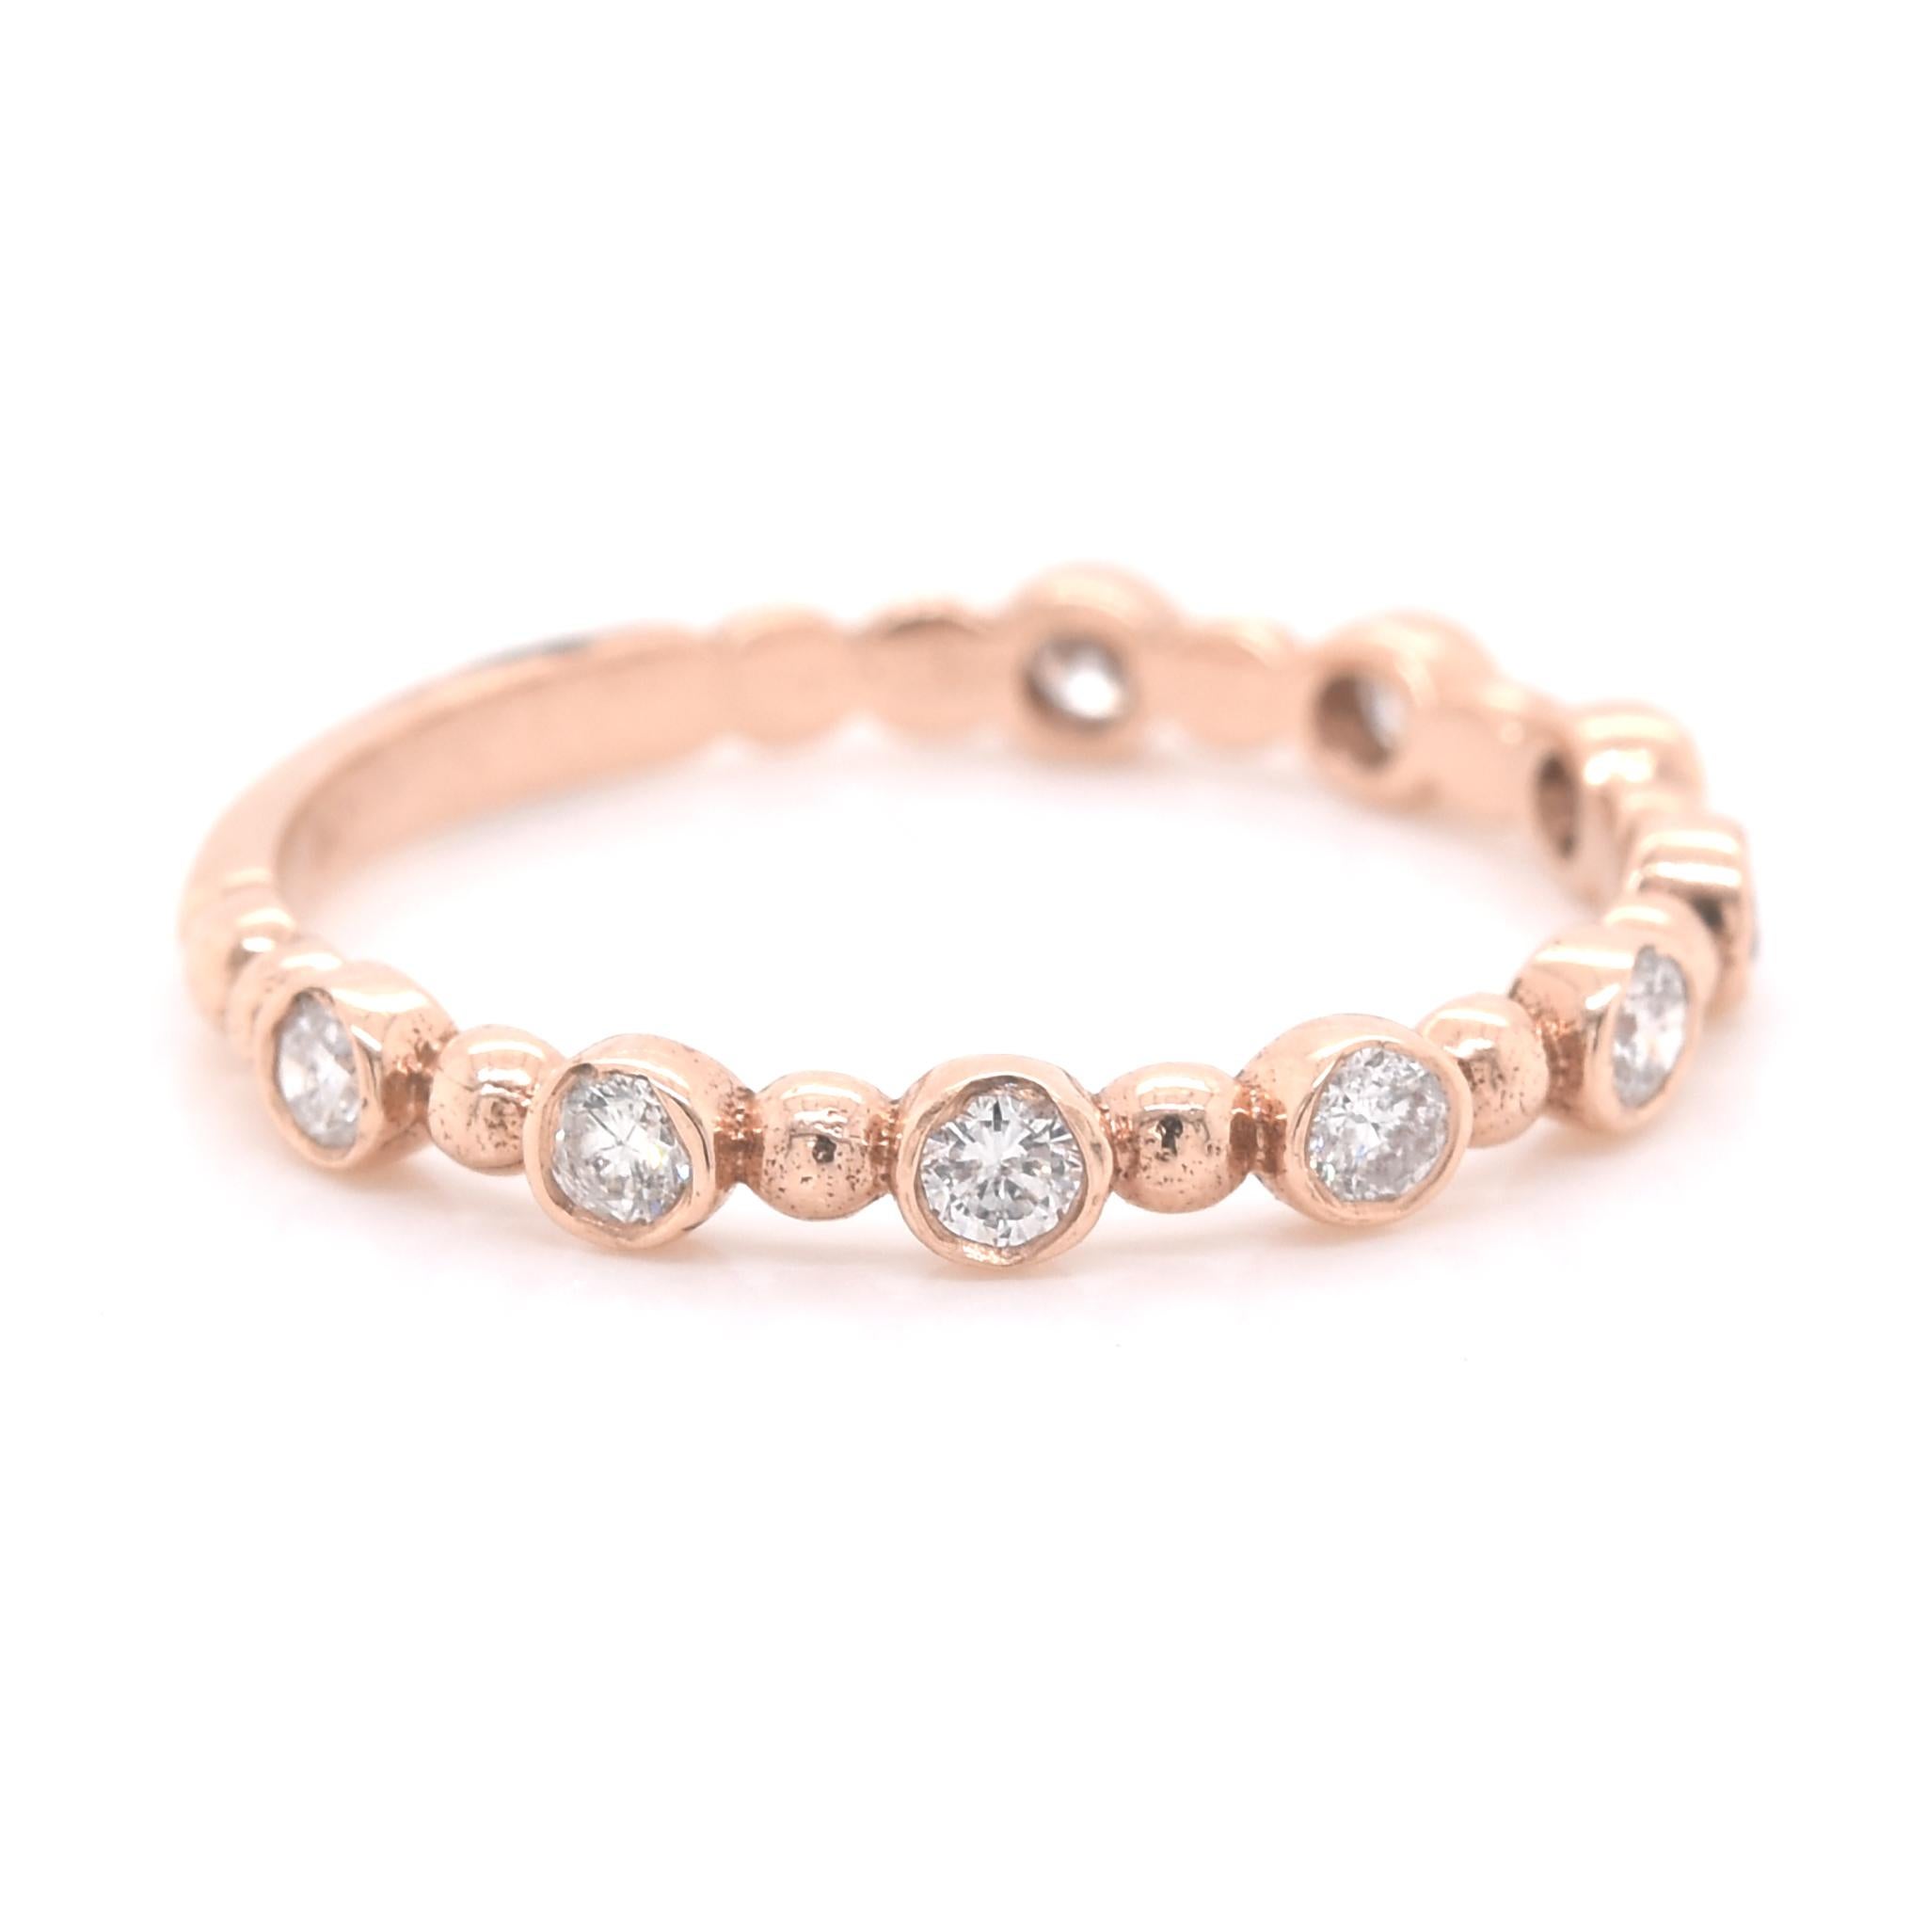 Designer: custom
Material: 14k rose gold
Diamonds: 9 round brilliant cuts = 0.28cttw
Color: I
Clarity: SI1-SI2
Size: 5 ½ 
Dimensions: ring is 2.35mm in width
Weight: 1.30 grams
